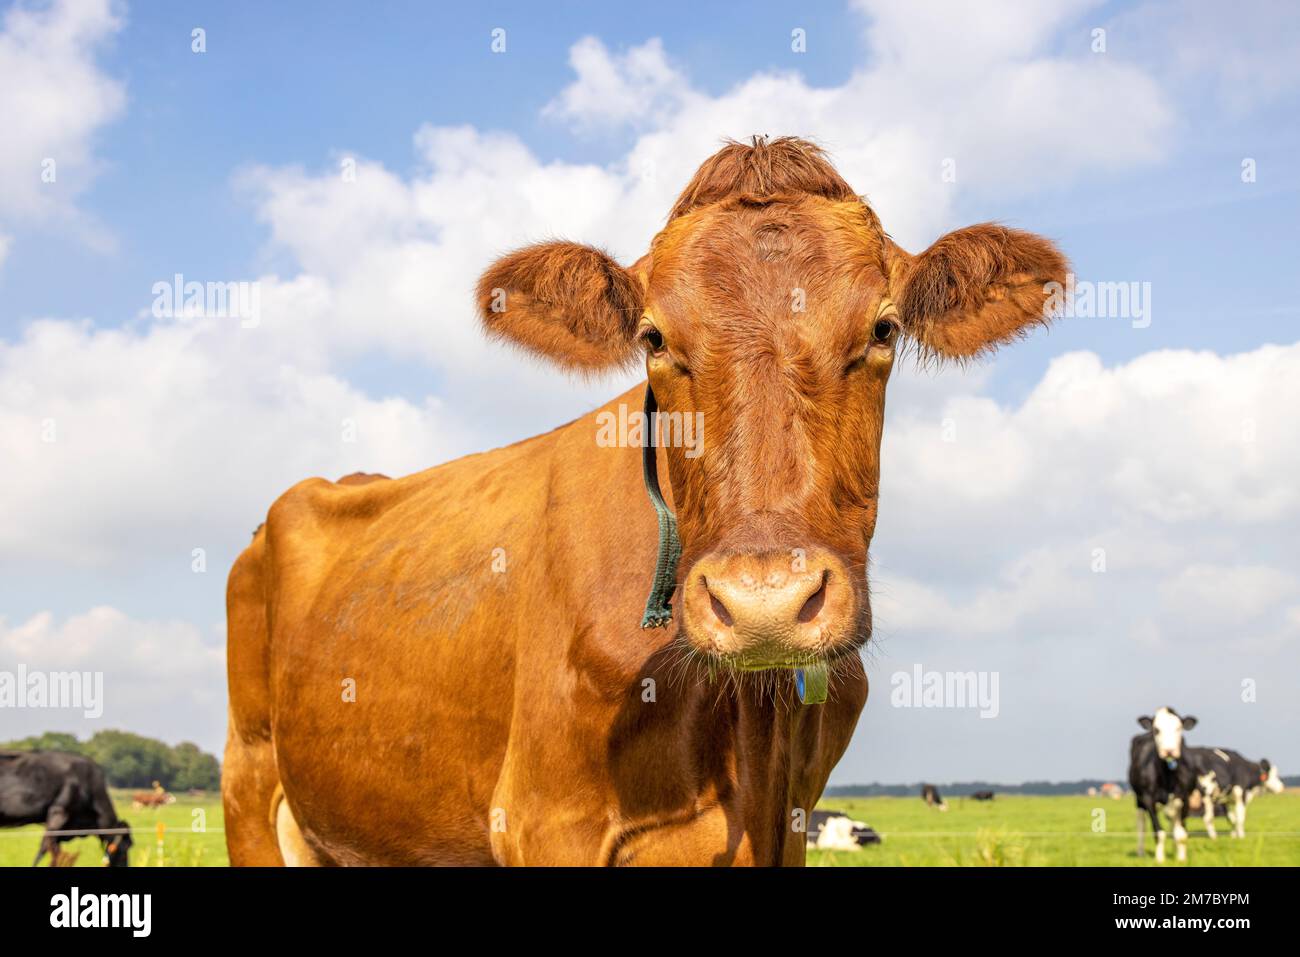 Cow portrait of a lovely red one looking, friendly and calm expression, a sky background Stock Photo